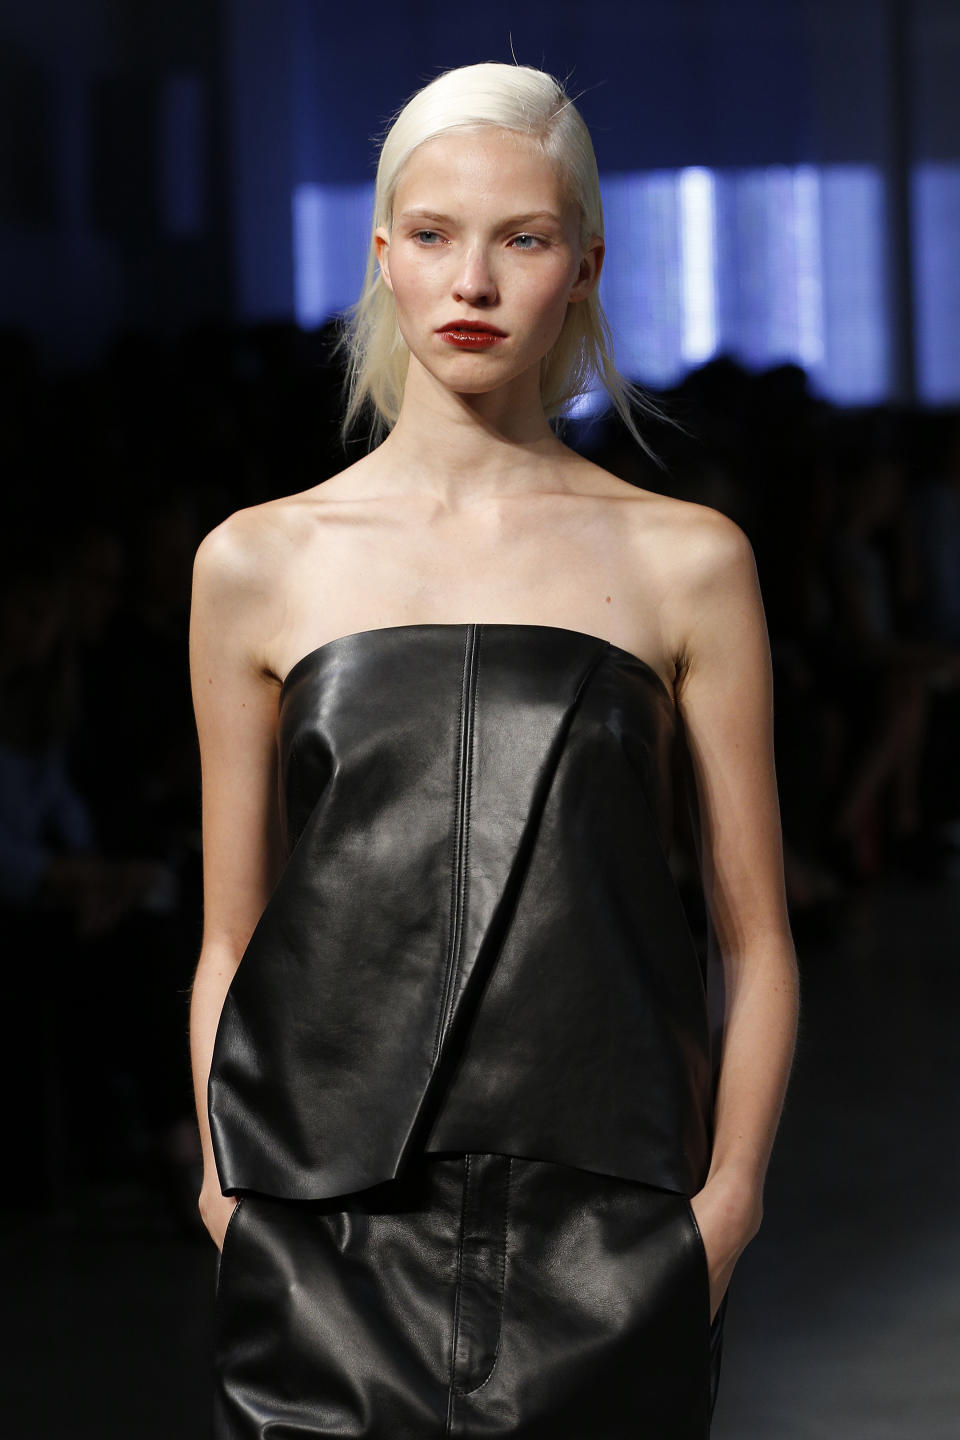 The Helmut Lang Spring 2014 collection is modeled during Fashion Week in New York, Friday, Sept. 6, 2013. (AP Photo/John Minchillo)